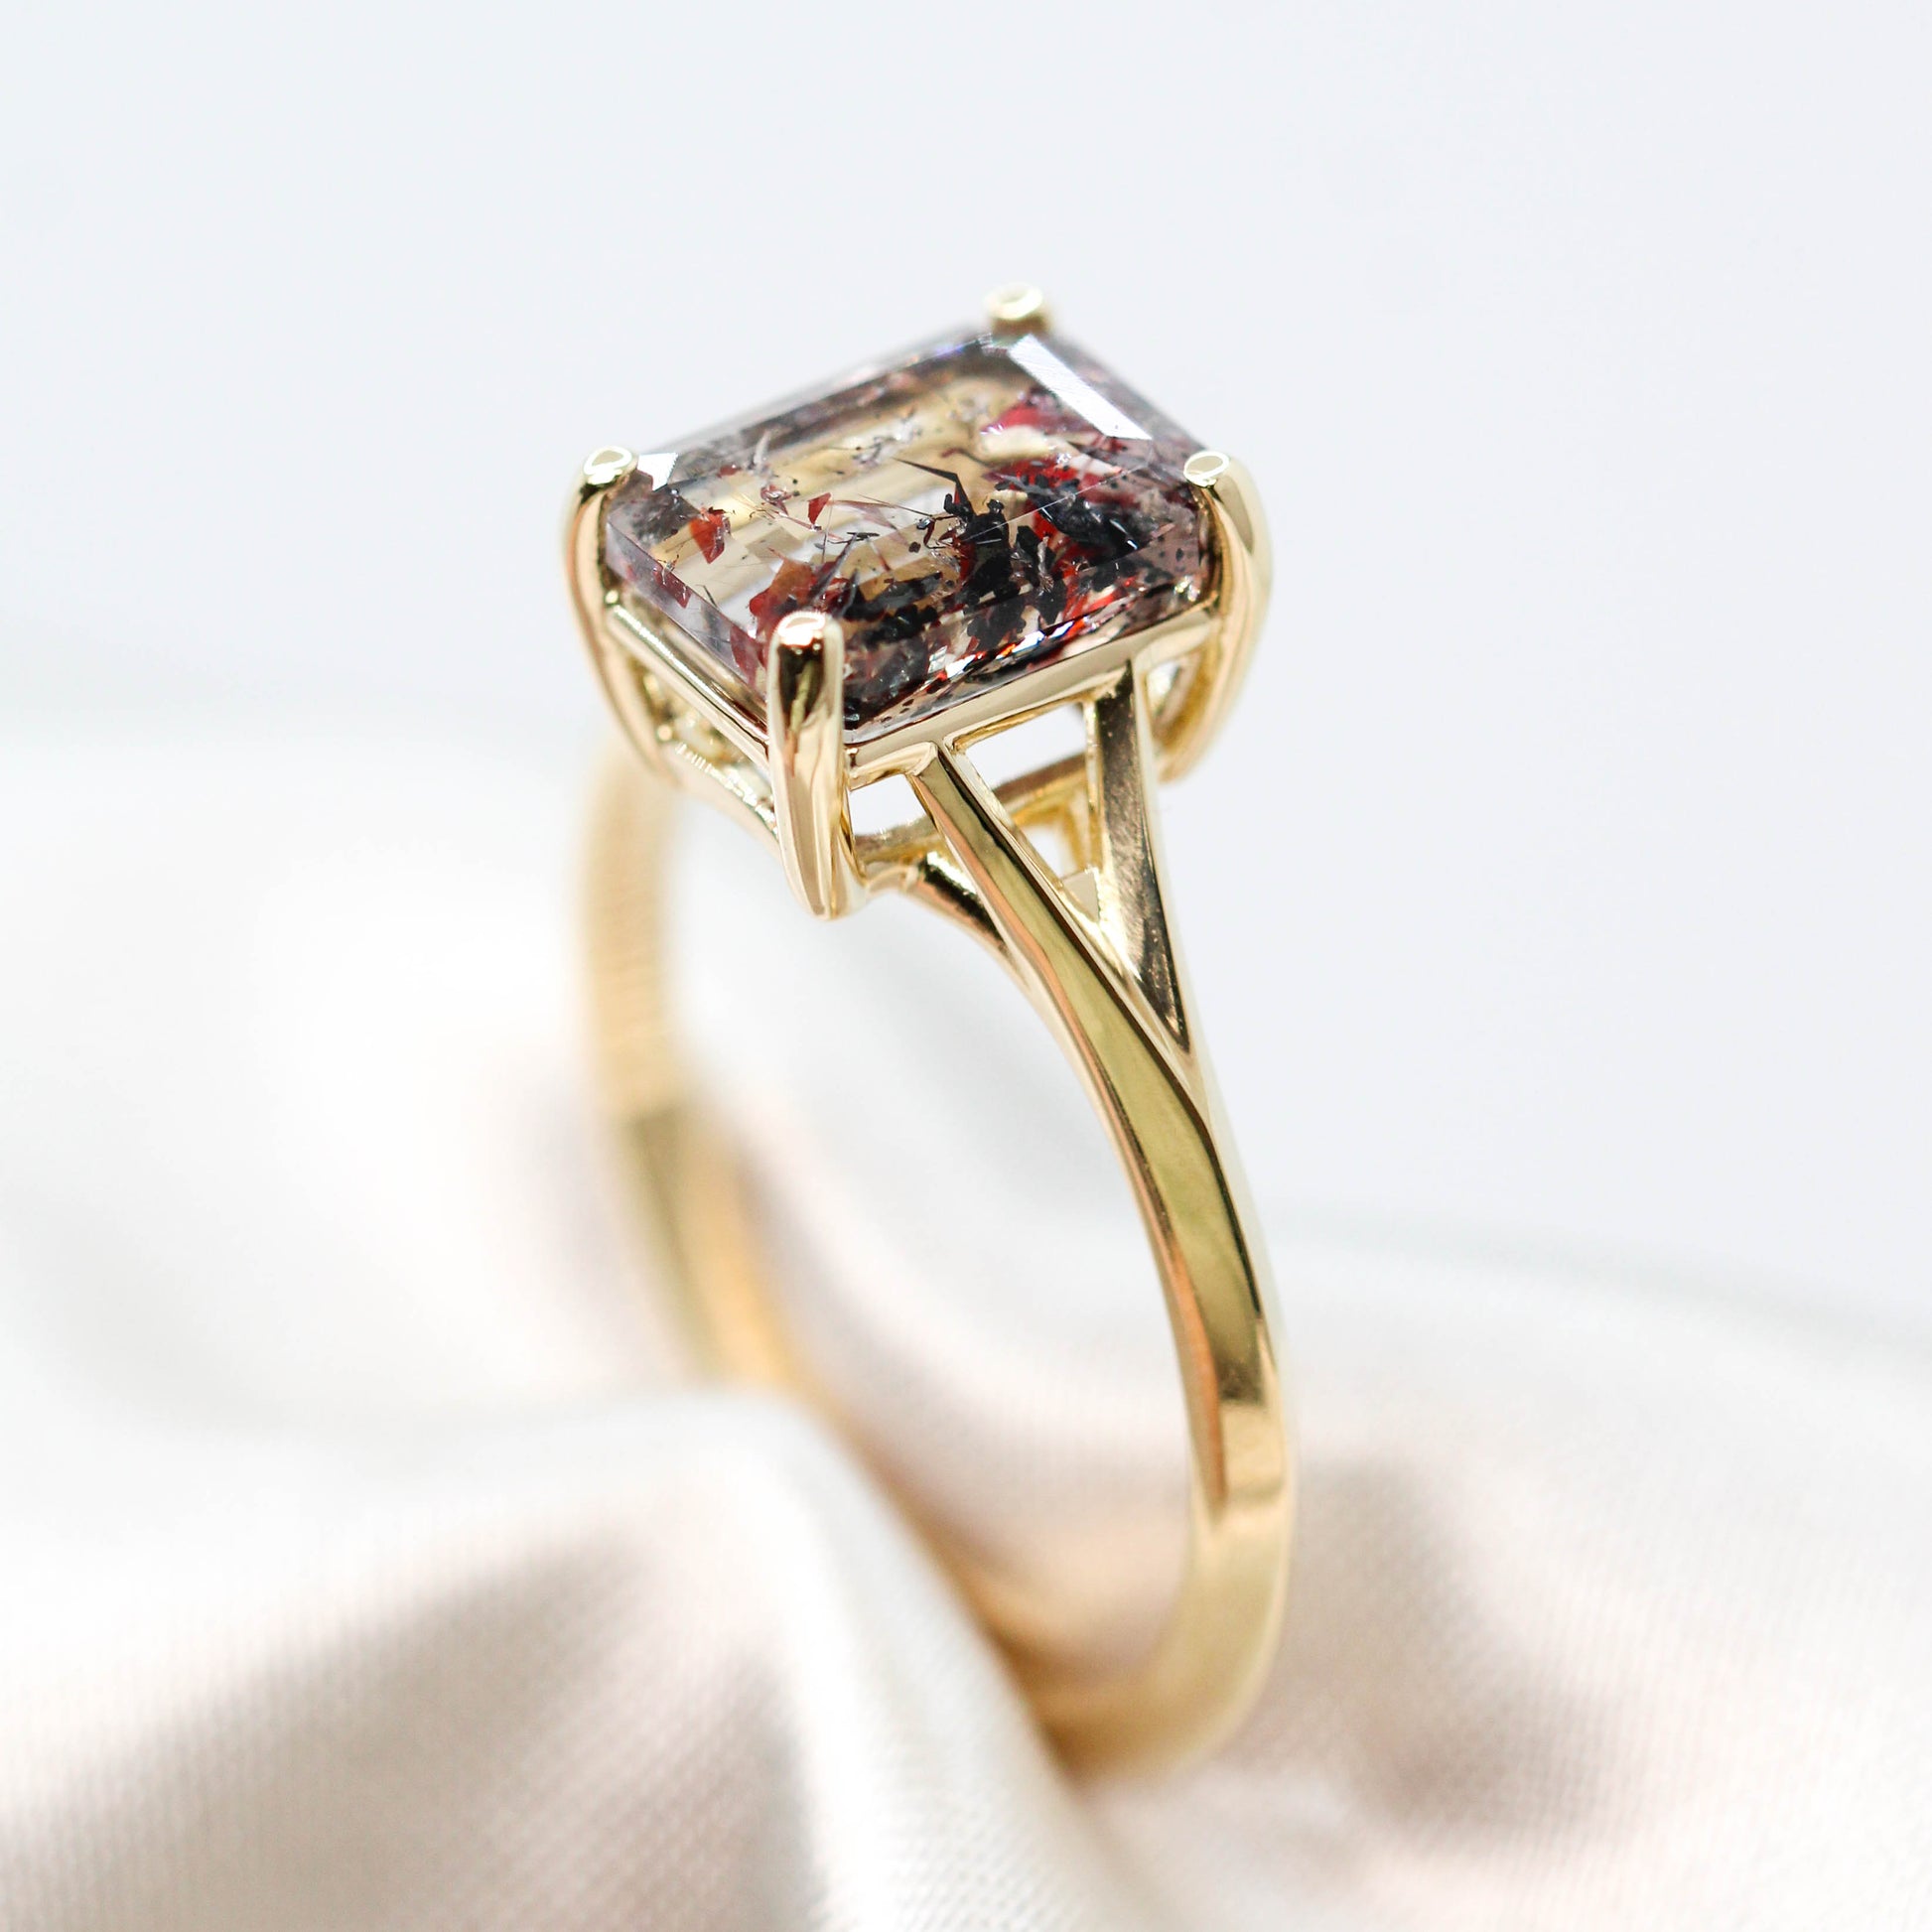 Sylvie Ring with a 2.47 Carat Emerald Cut Melody Quartz - Ready to Size and Ship - Midwinter Co. Alternative Bridal Rings and Modern Fine Jewelry